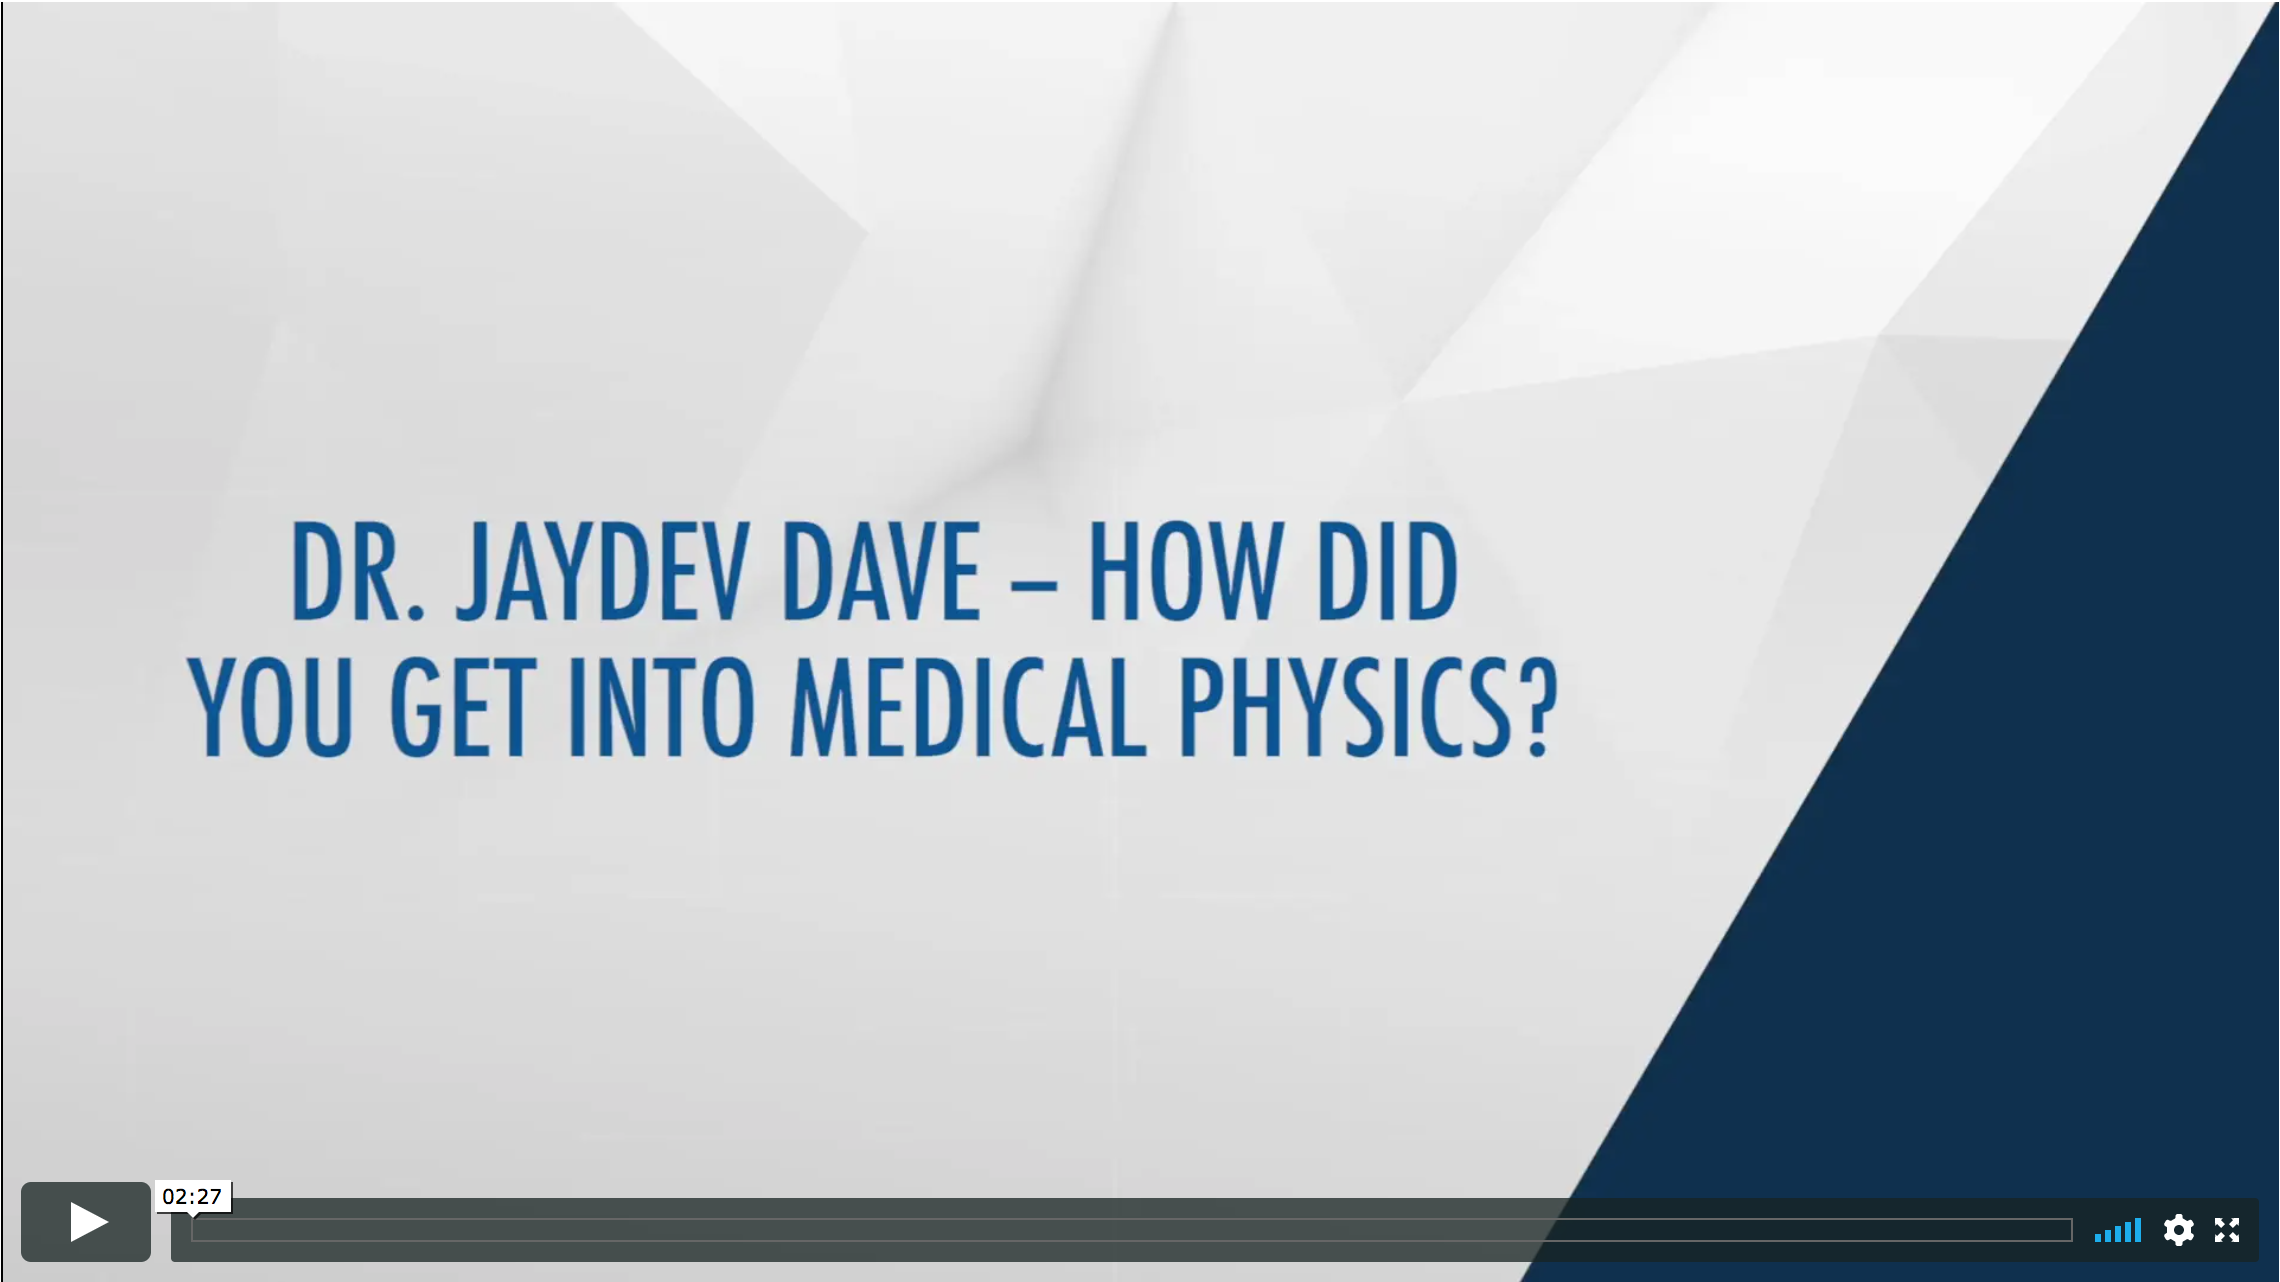 Dr. Jaydev Dave - How did you get into Medical Physics? Video Thumbnail